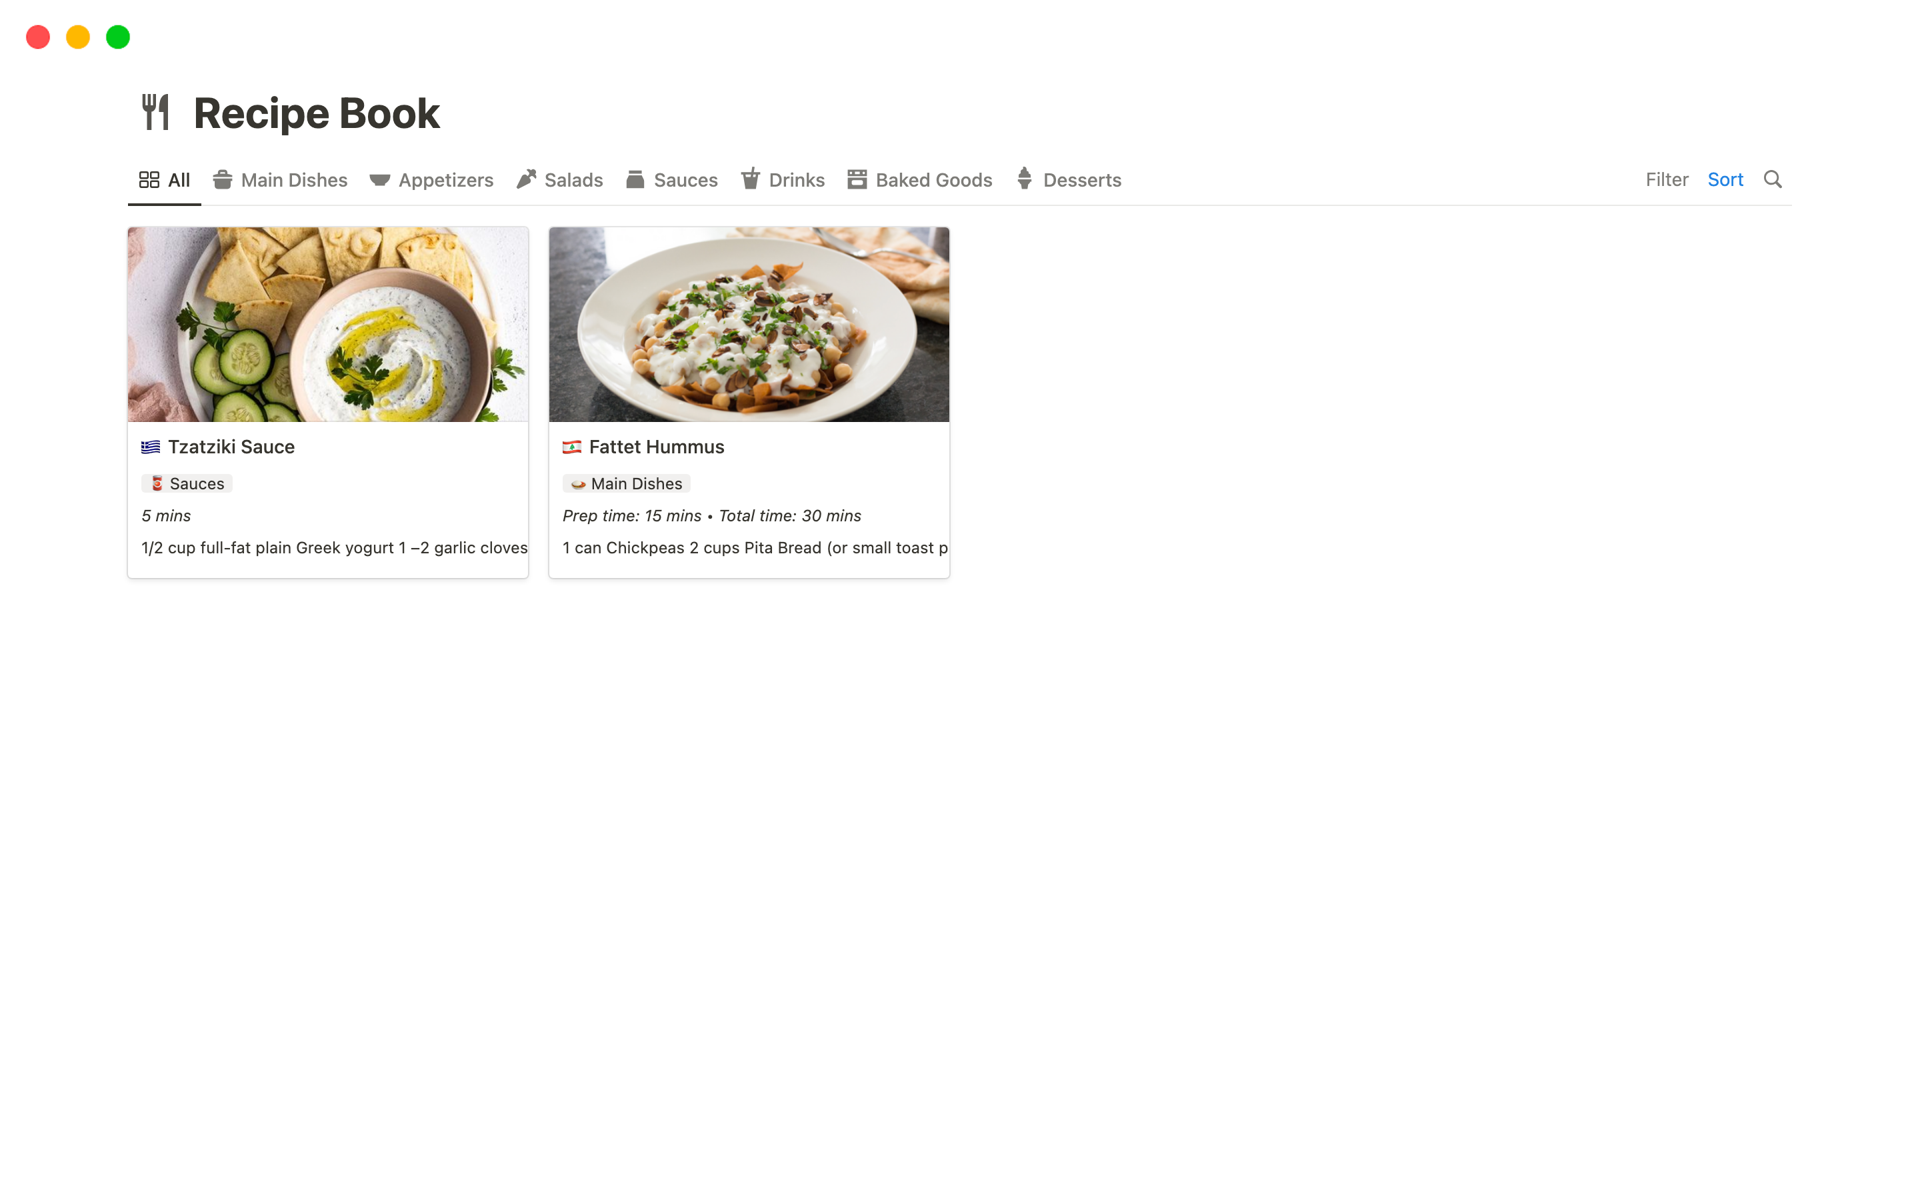 A distraction-free visual recipe book categorized by main dishes, appetizers, salads, baked goods, sauces, drinks, and desserts.